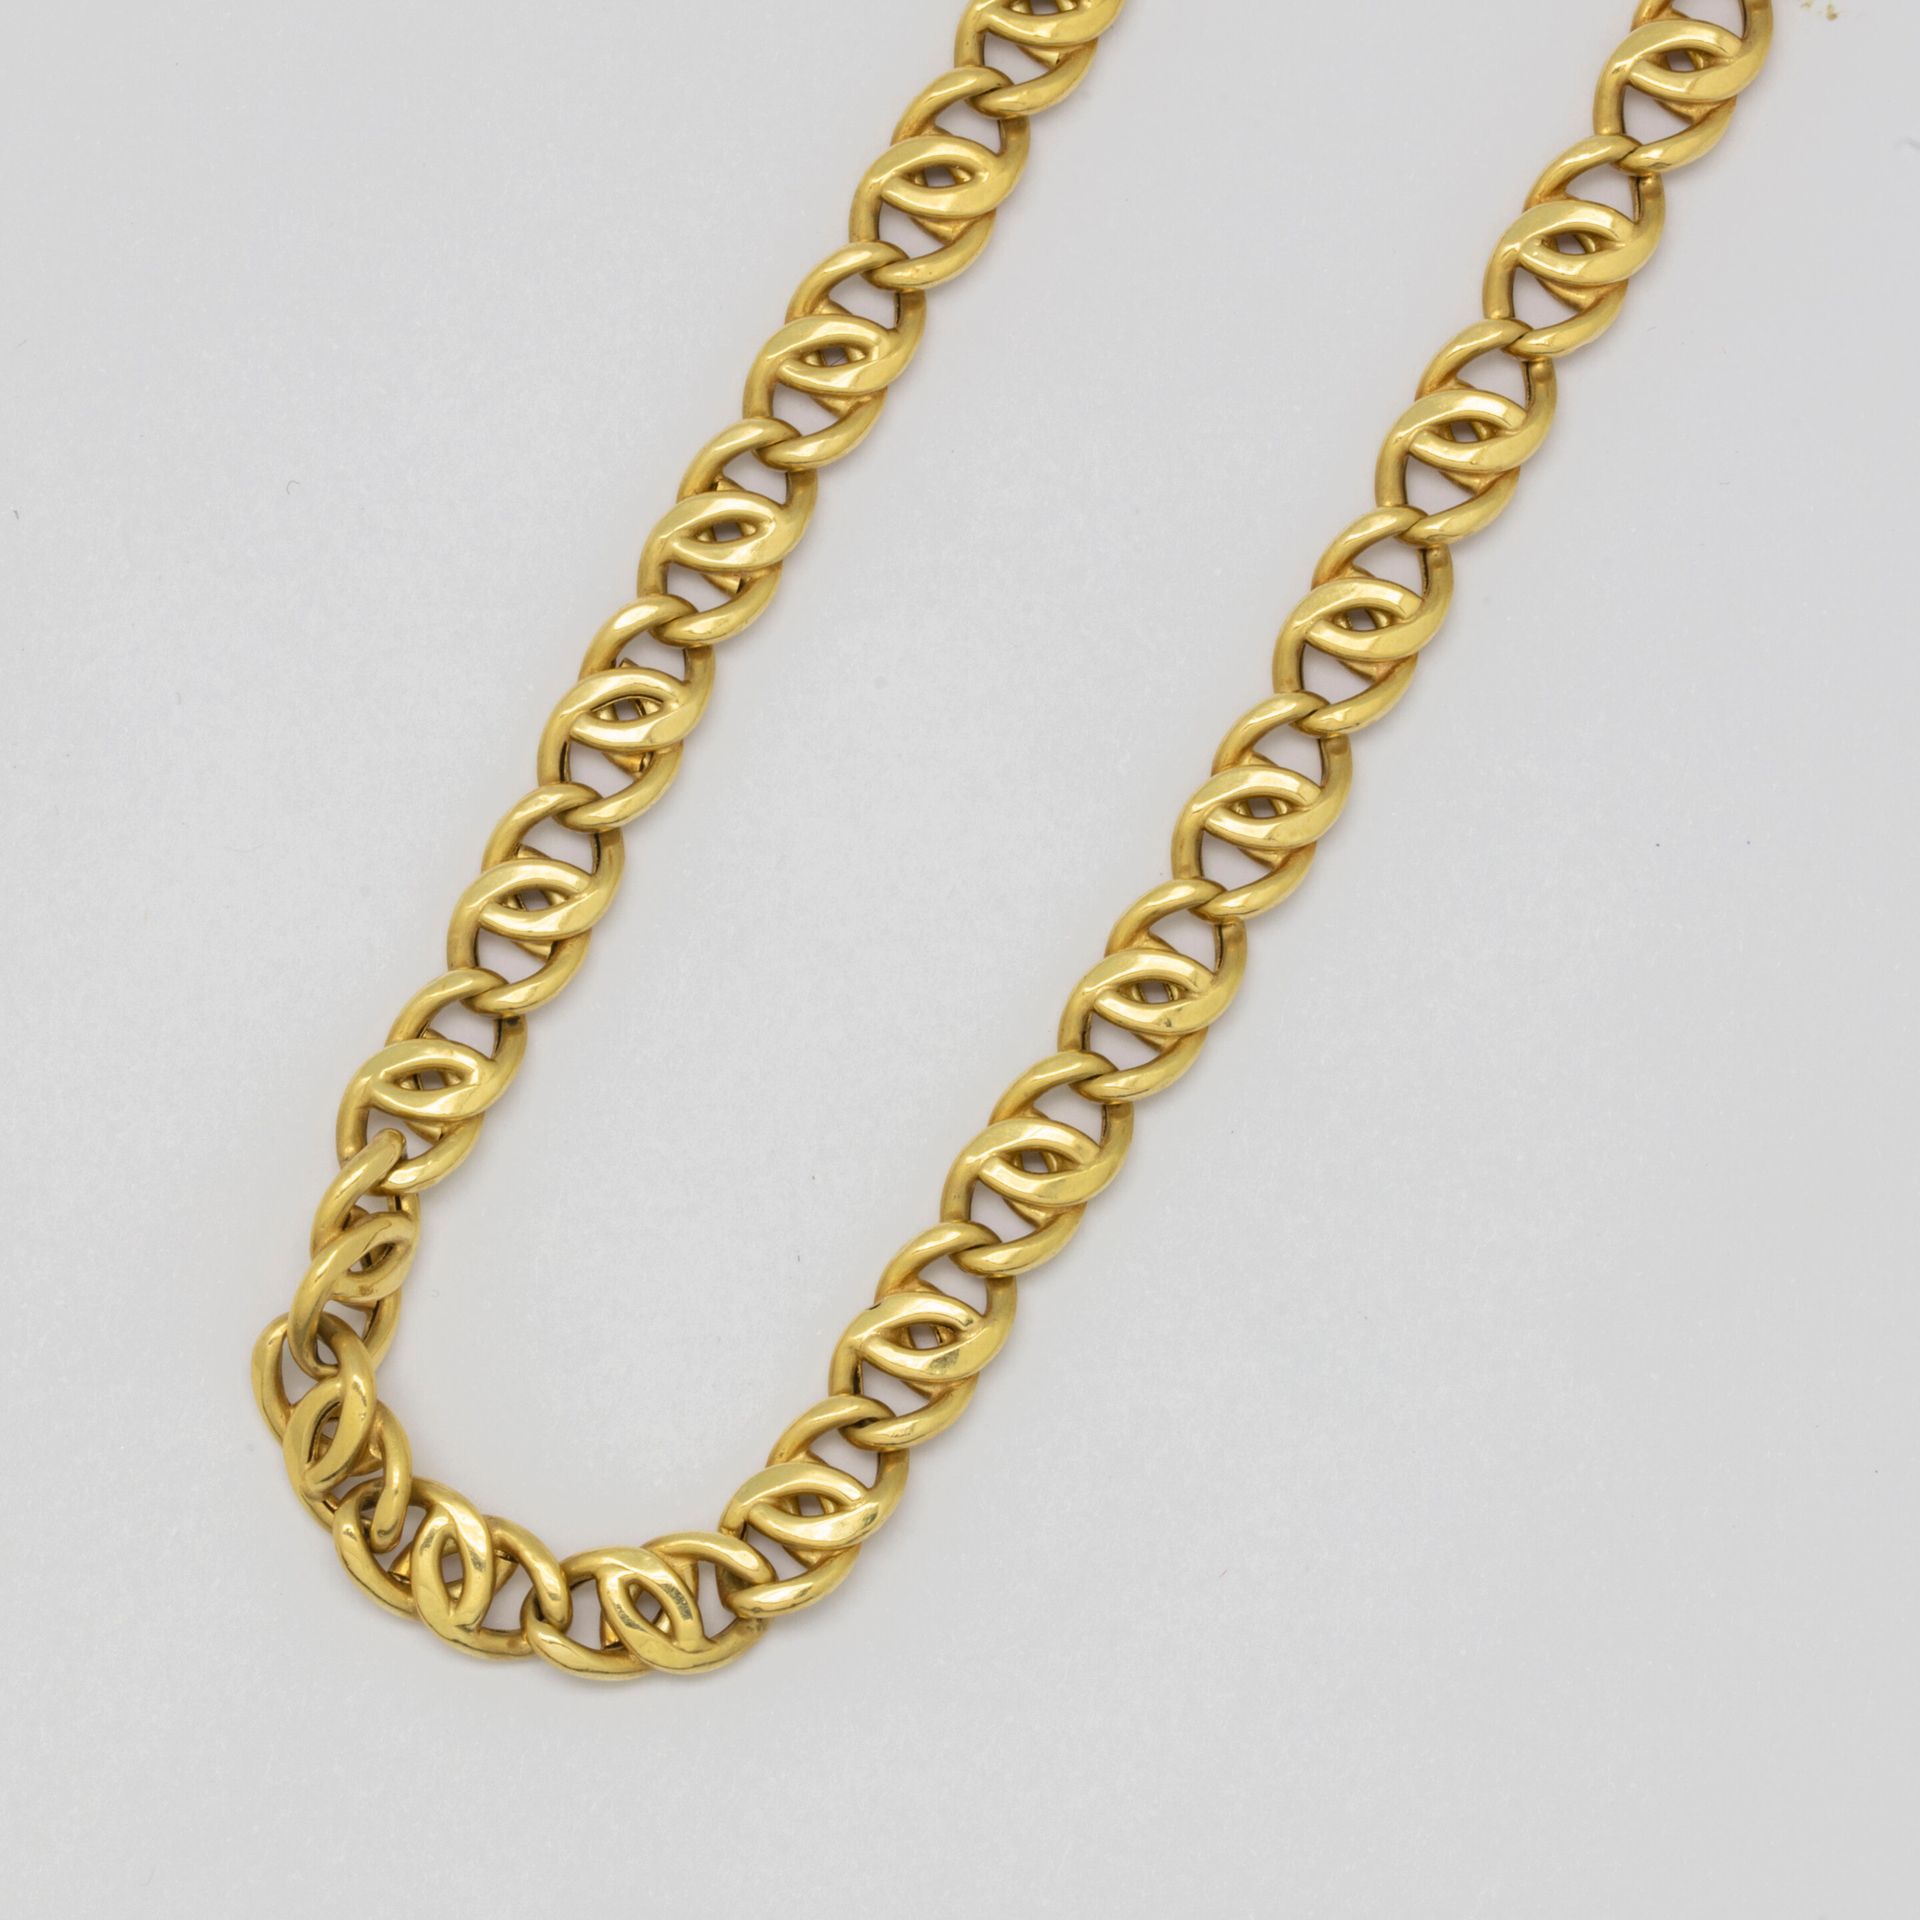 Null Yellow gold necklace with large links

weight 20,8 g